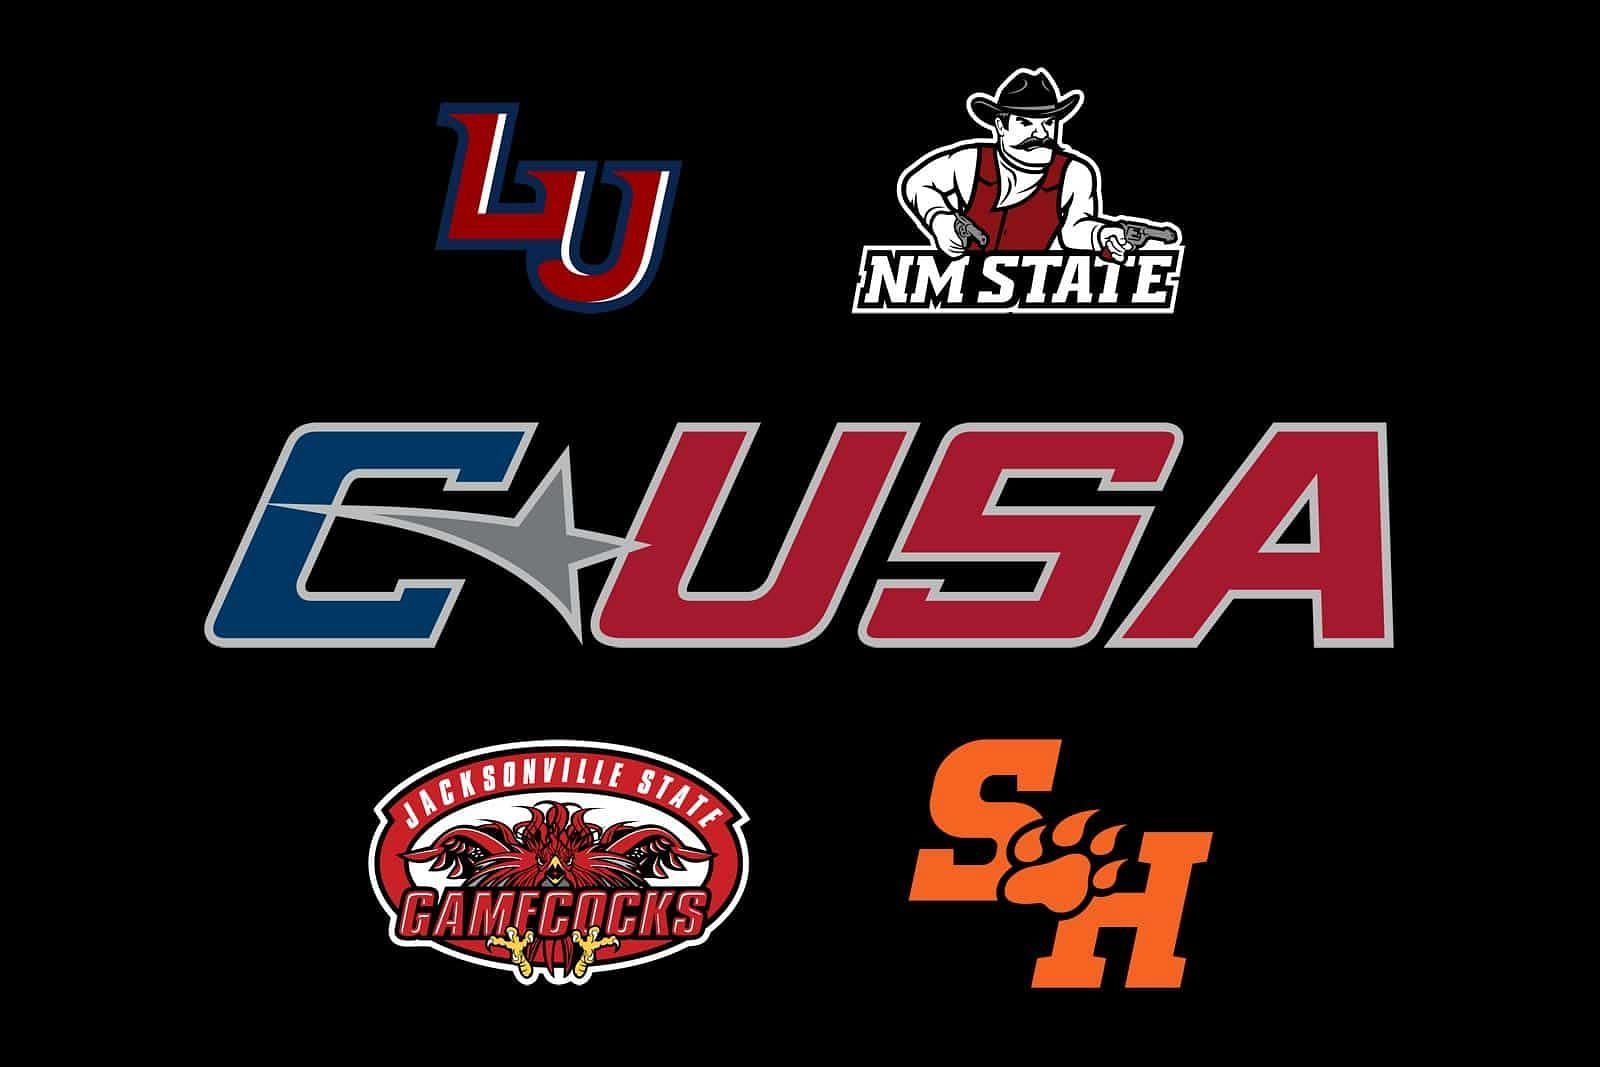 four new members set to start competing in the Conference USA from 2023